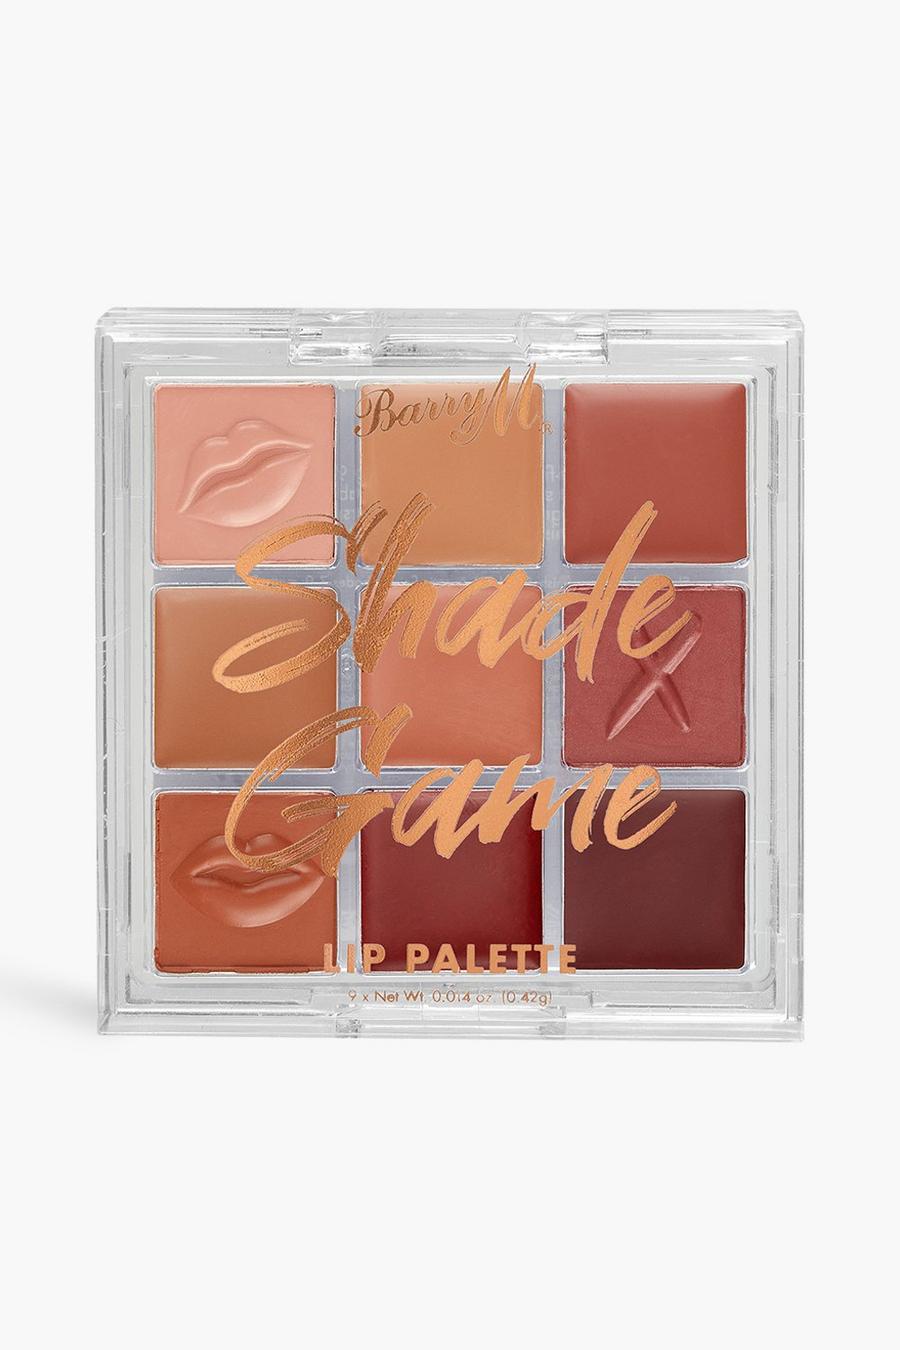 Barry M Shade Game Lippen-Palette, Multi